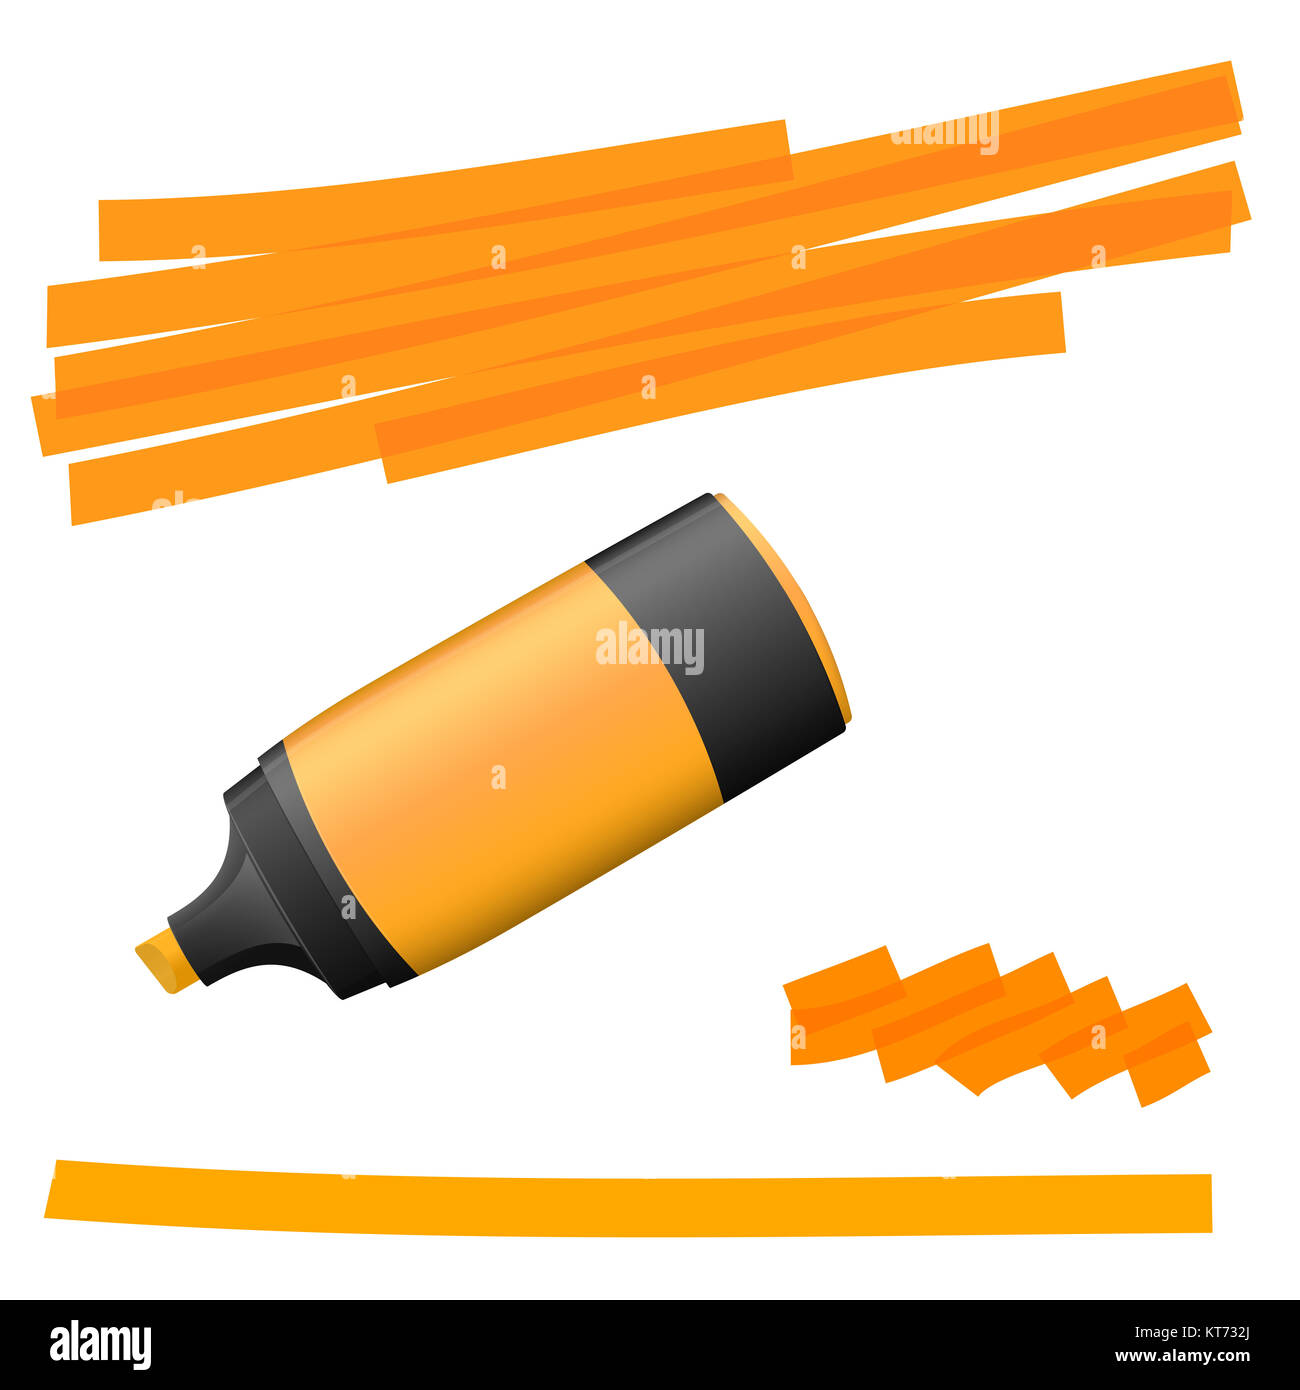 orange colored high lighter with markings for advertising usage Stock Photo